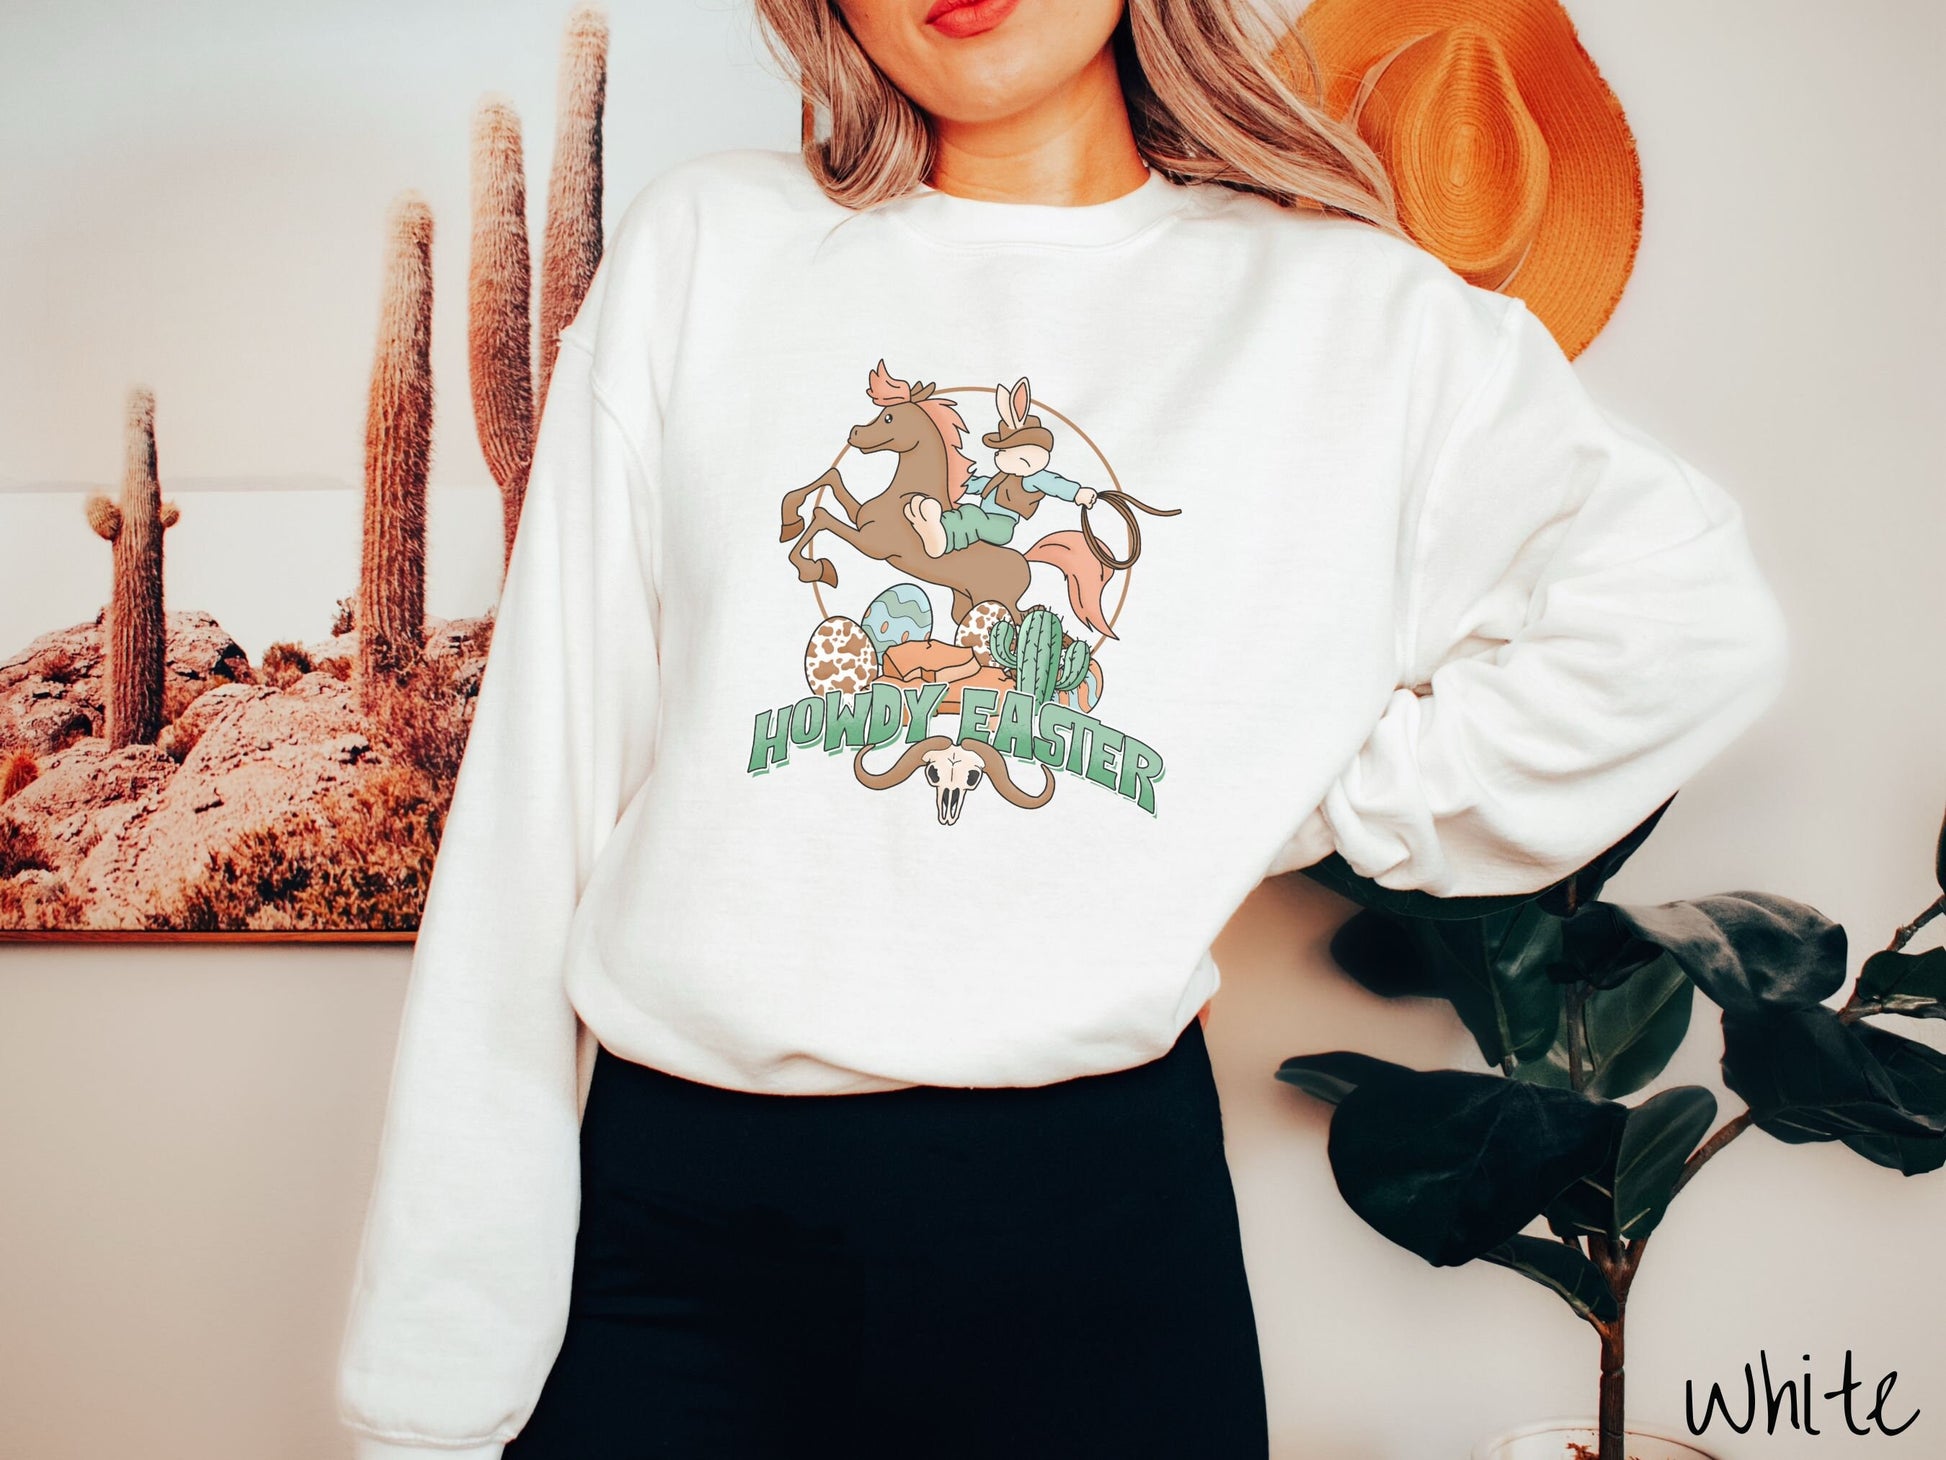 A woman wearing a cute, vintage white colored sweatshirt with a cowboy rabbit riding a bucking, brown horse while holding a lasso rope. Below is green text Howdy Easter along with colorful Easter eggs, a green cactus, and a horned bull skull.